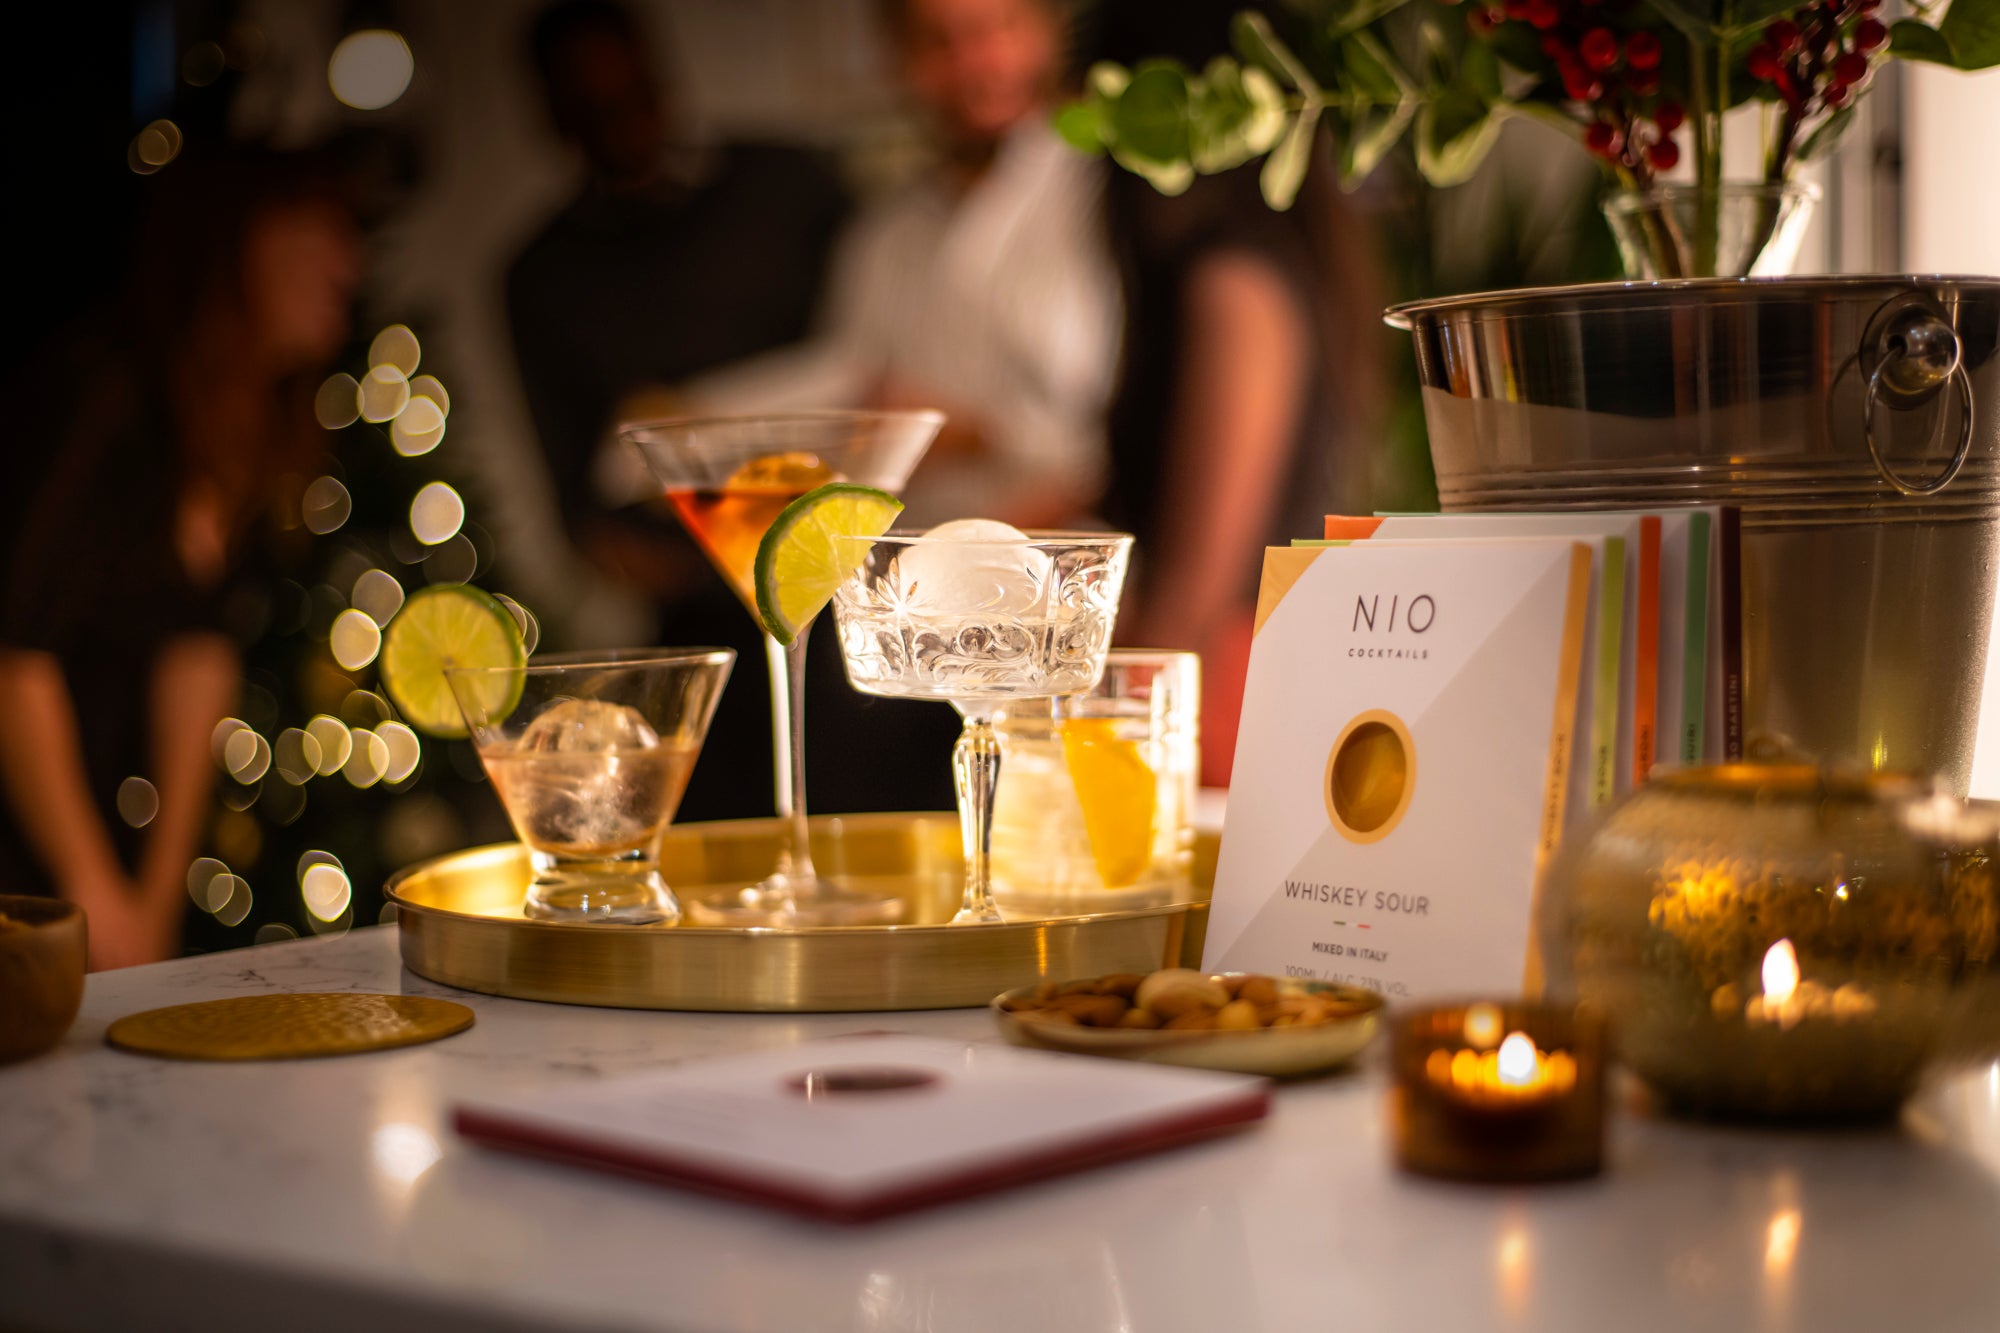  There's nothing better than after dinner drinks with family and friends. NIO Cocktails has just the right selection of smooth, mellow cocktails for you.